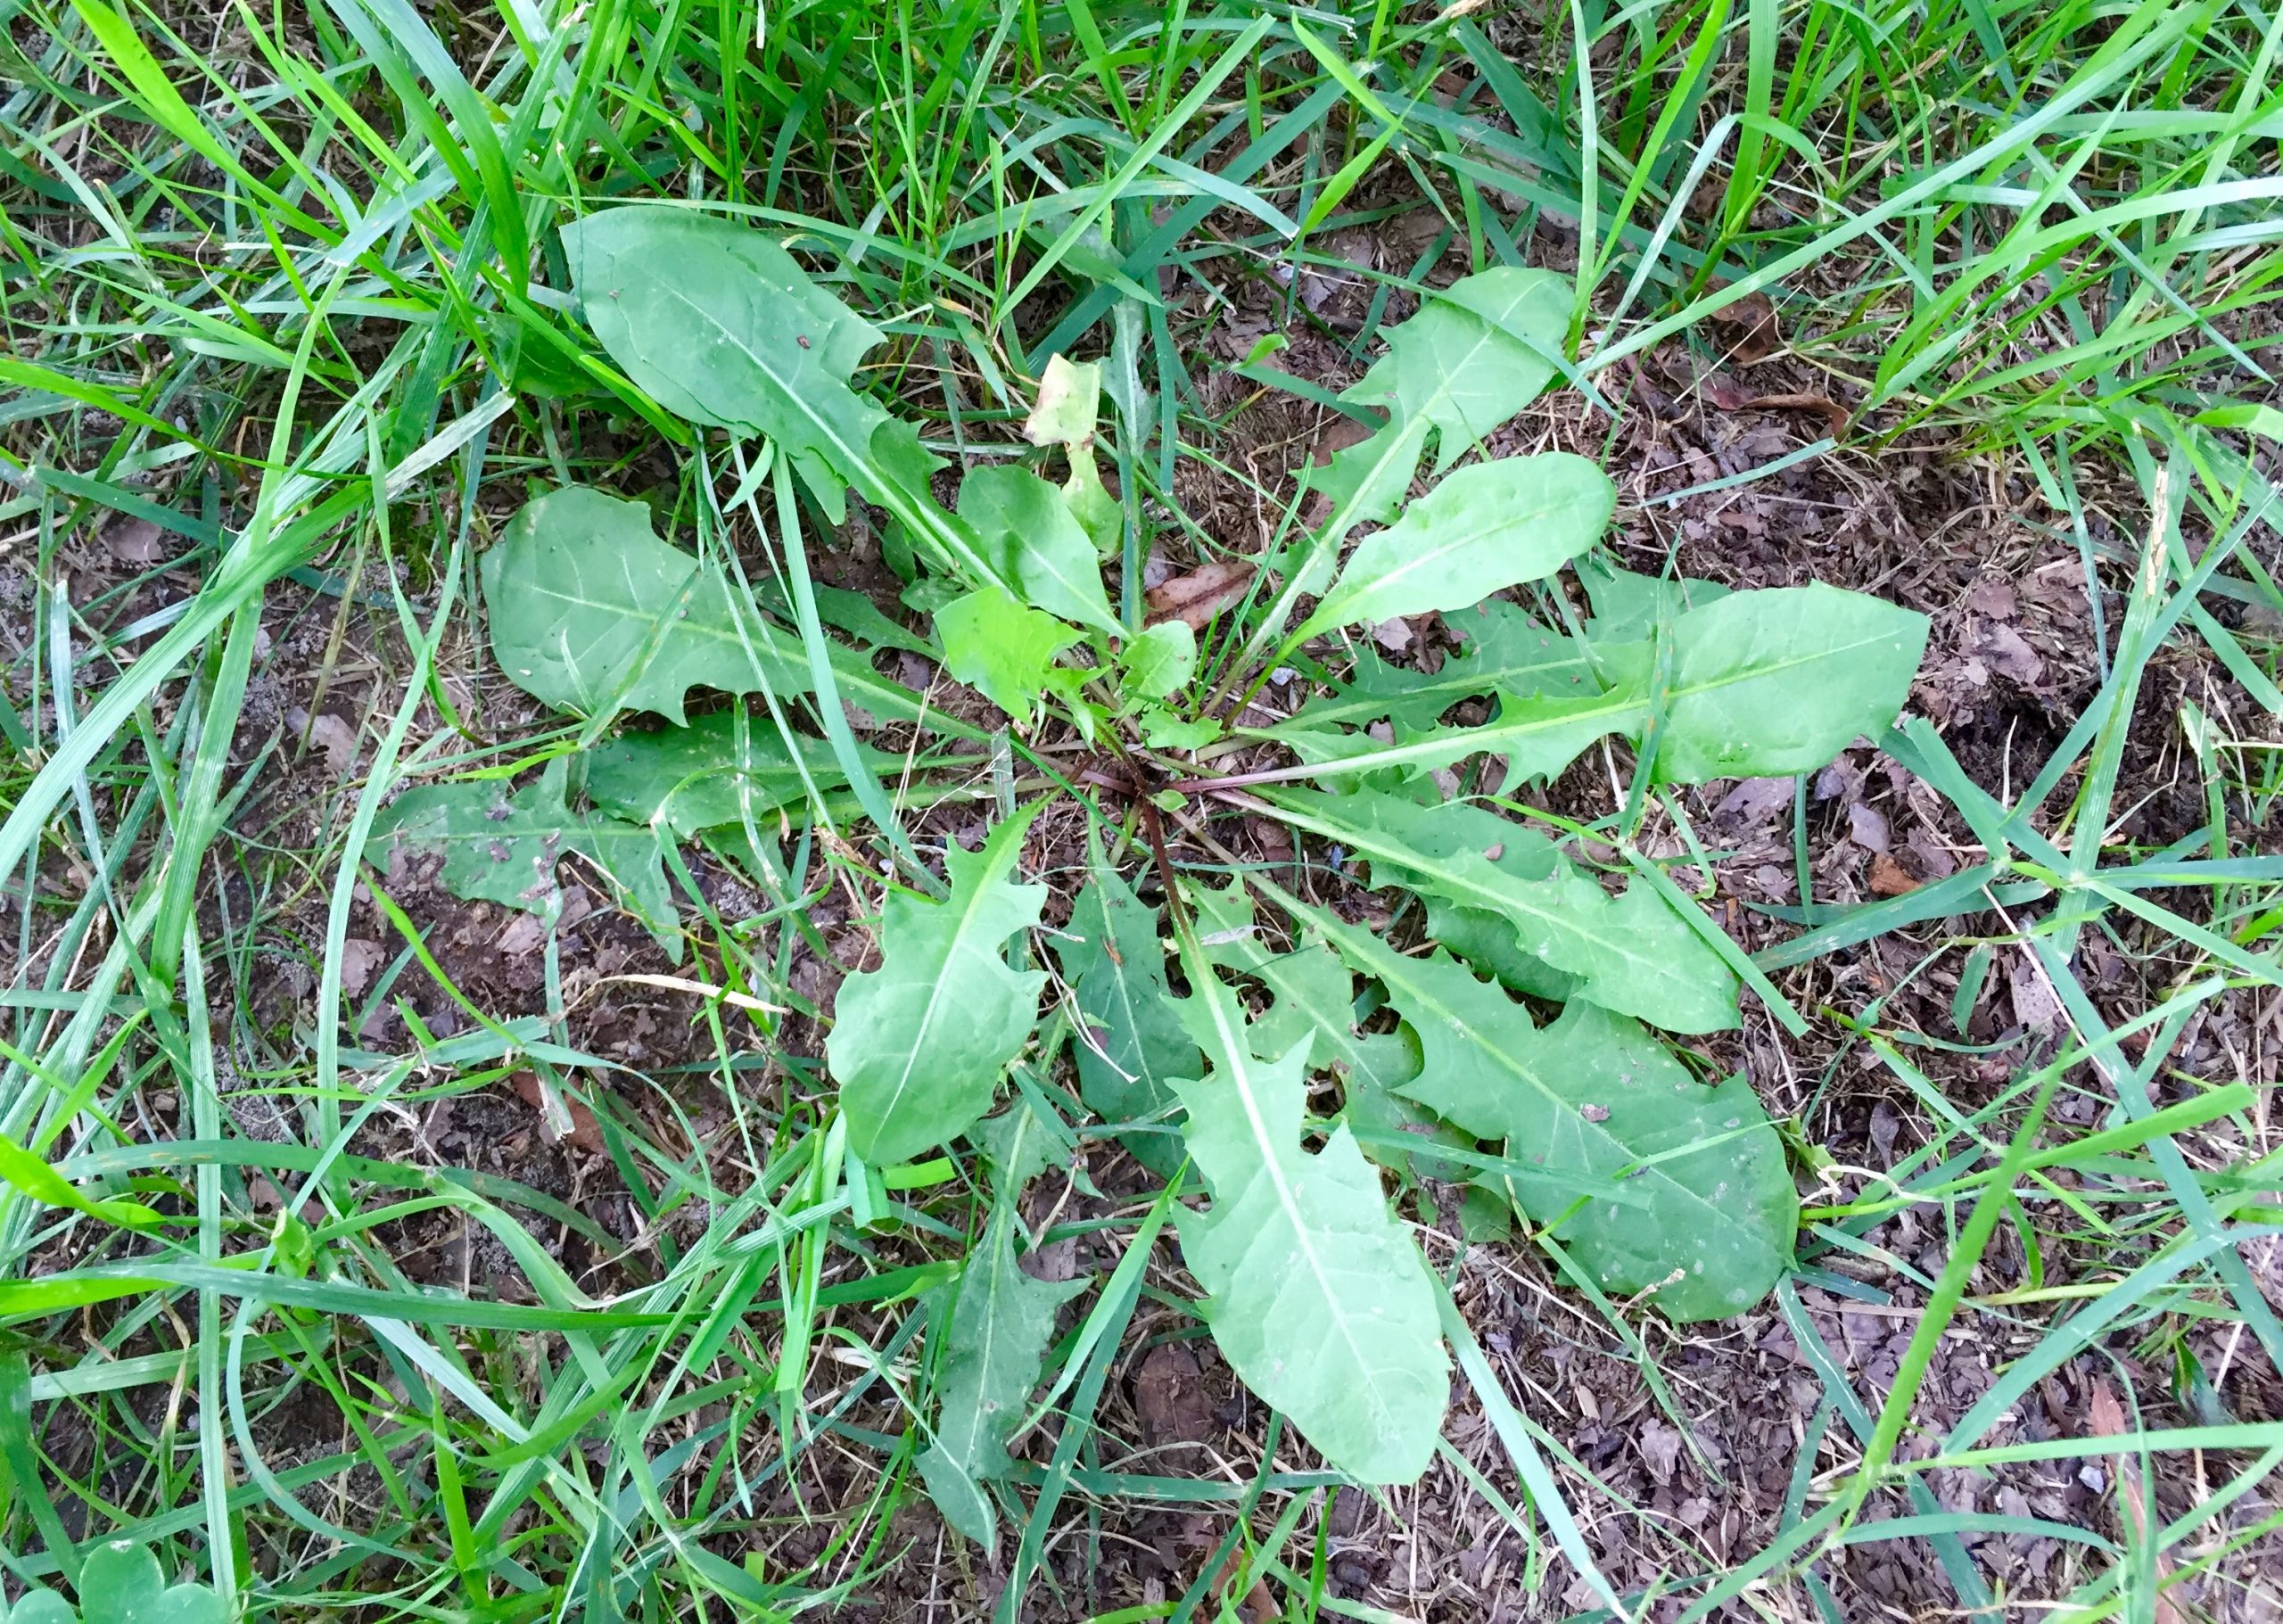 Common Backyard Weeds
 This mon Yard Weed is an Anti Cancer Powerhouse